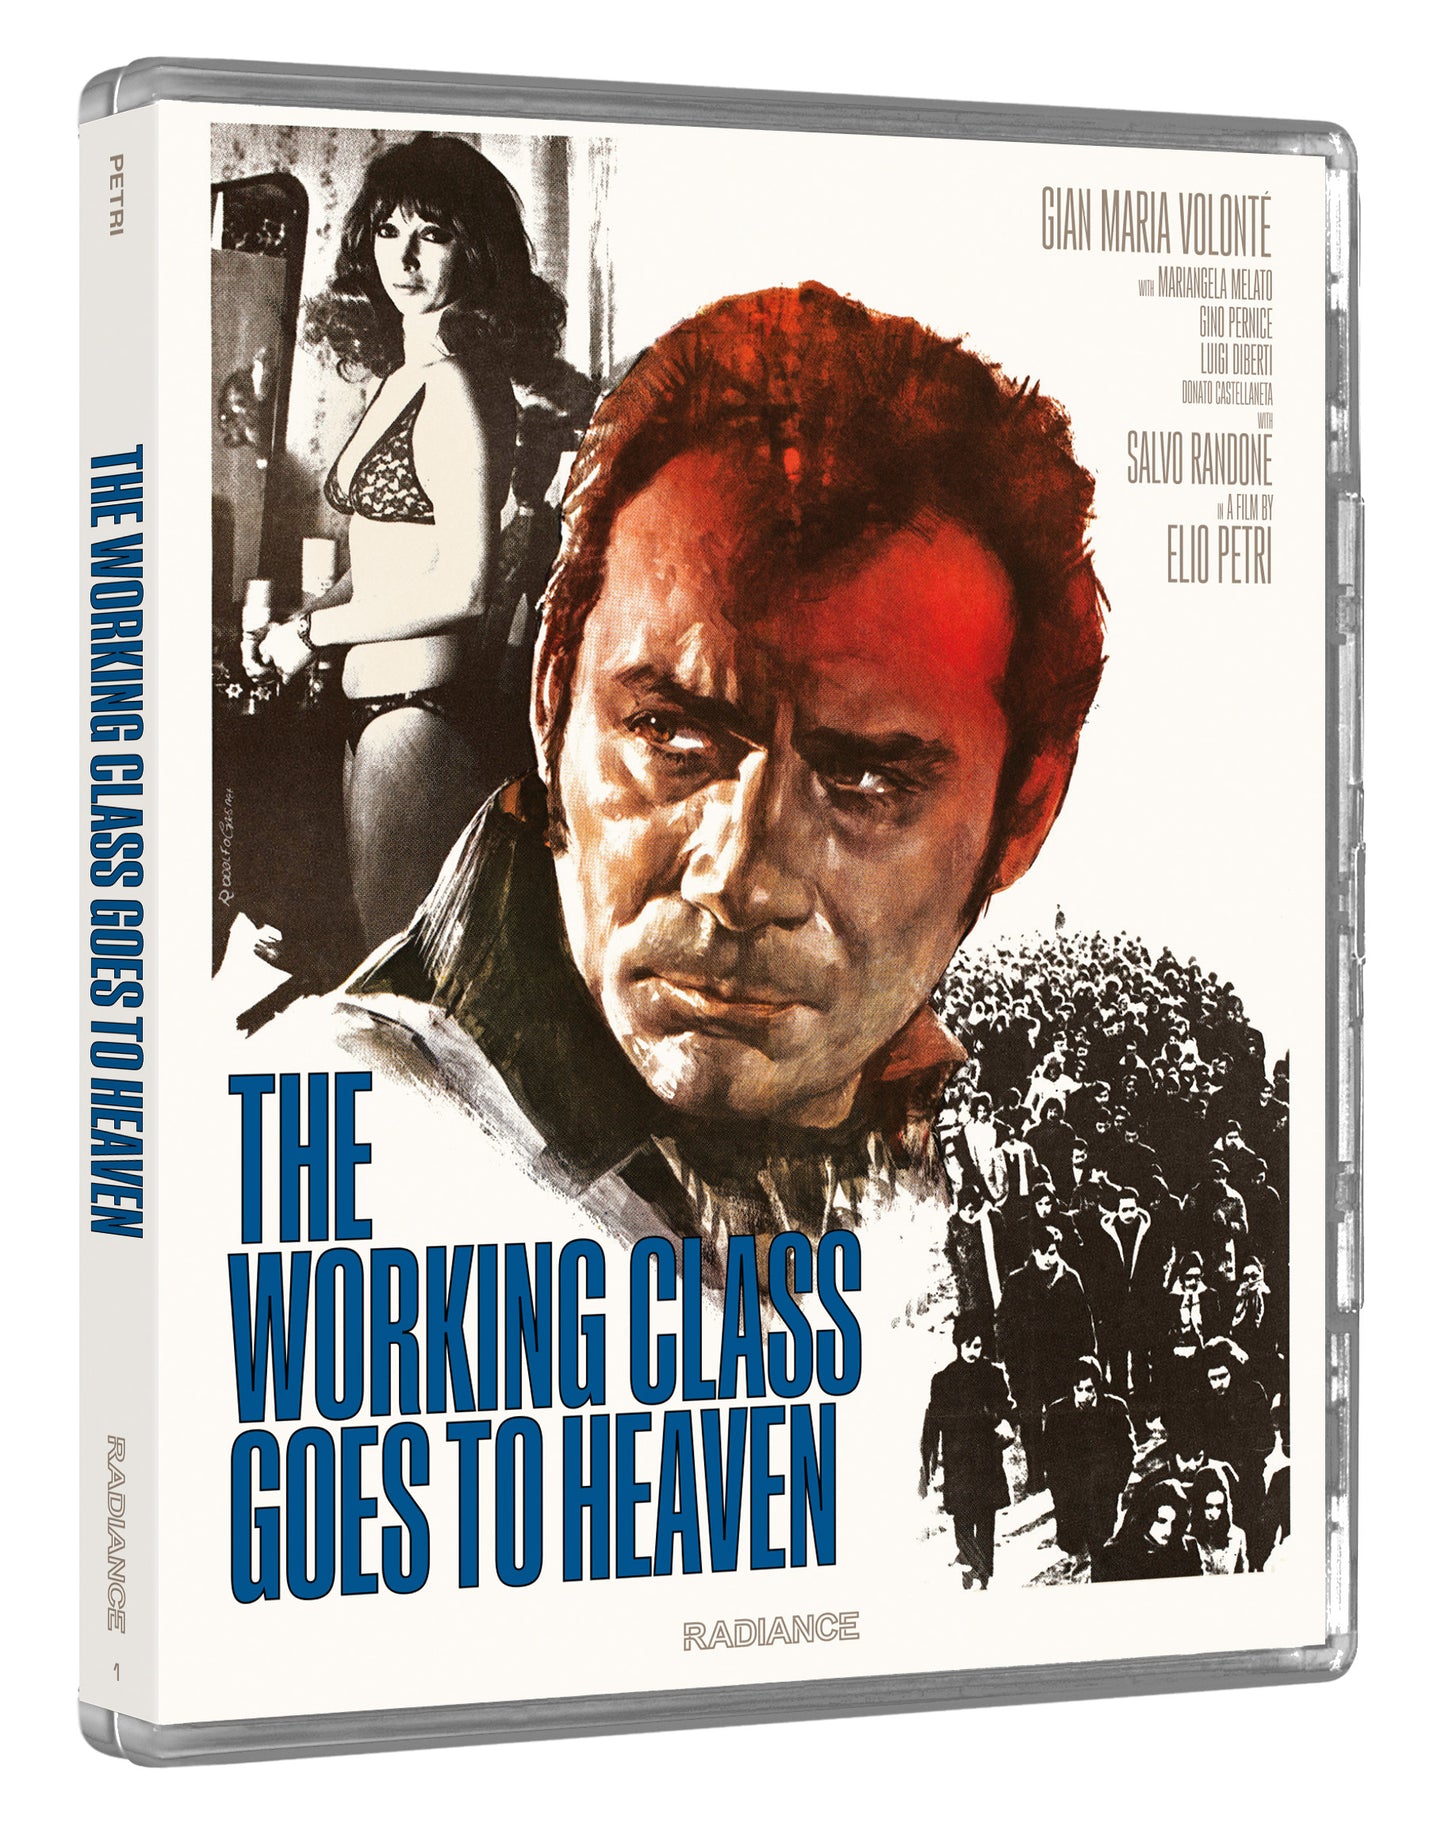 The Working Class Goes to Heaven (LE)